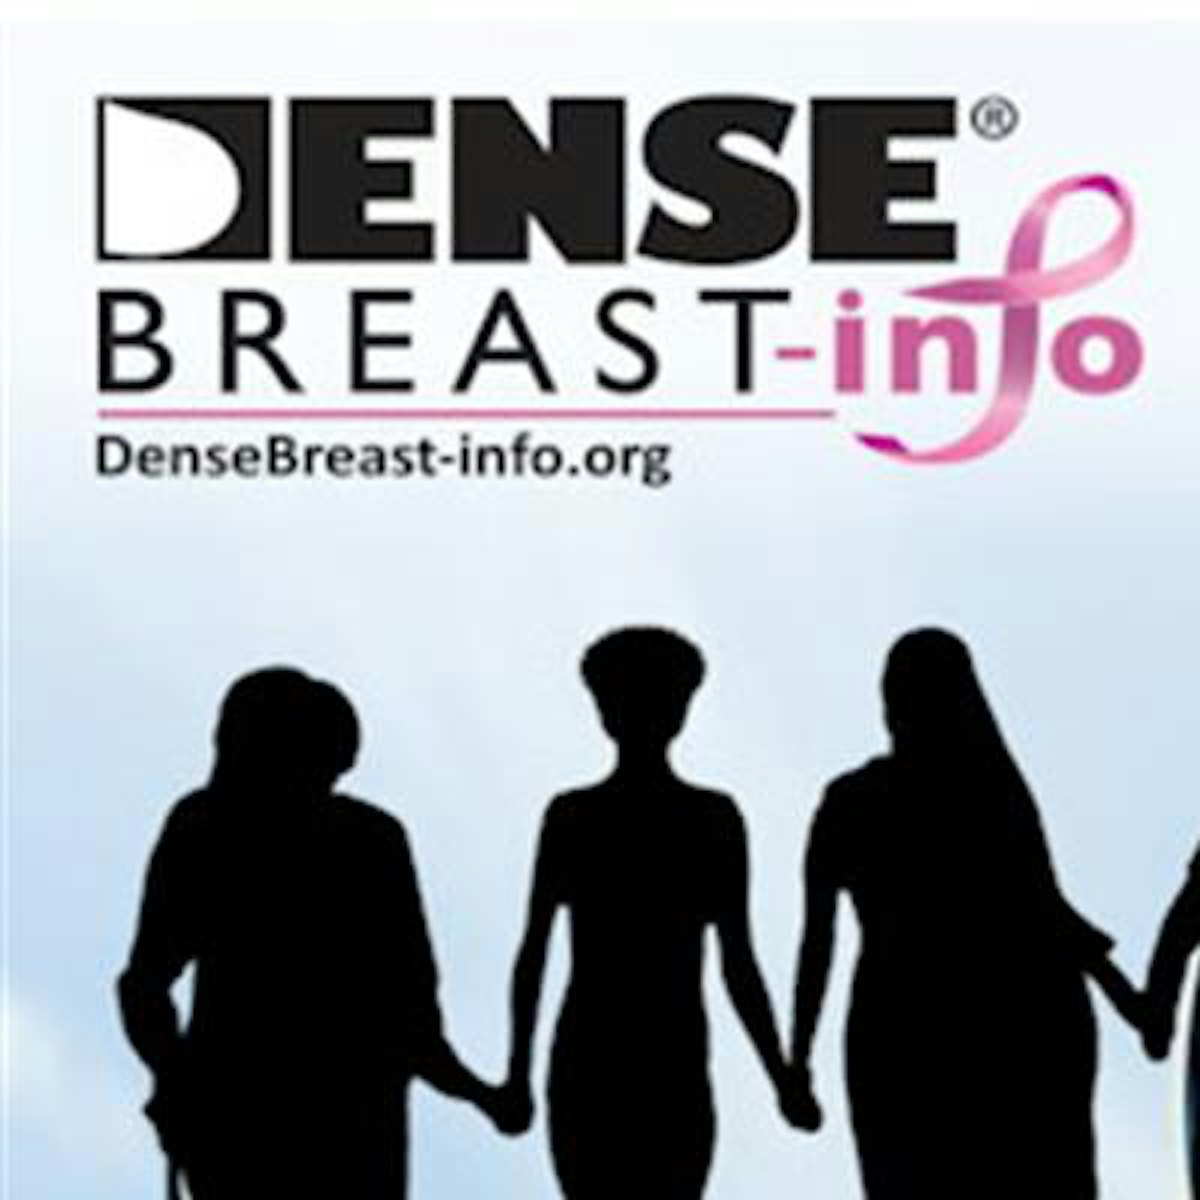 State Law Map  DenseBreast-info, Inc.